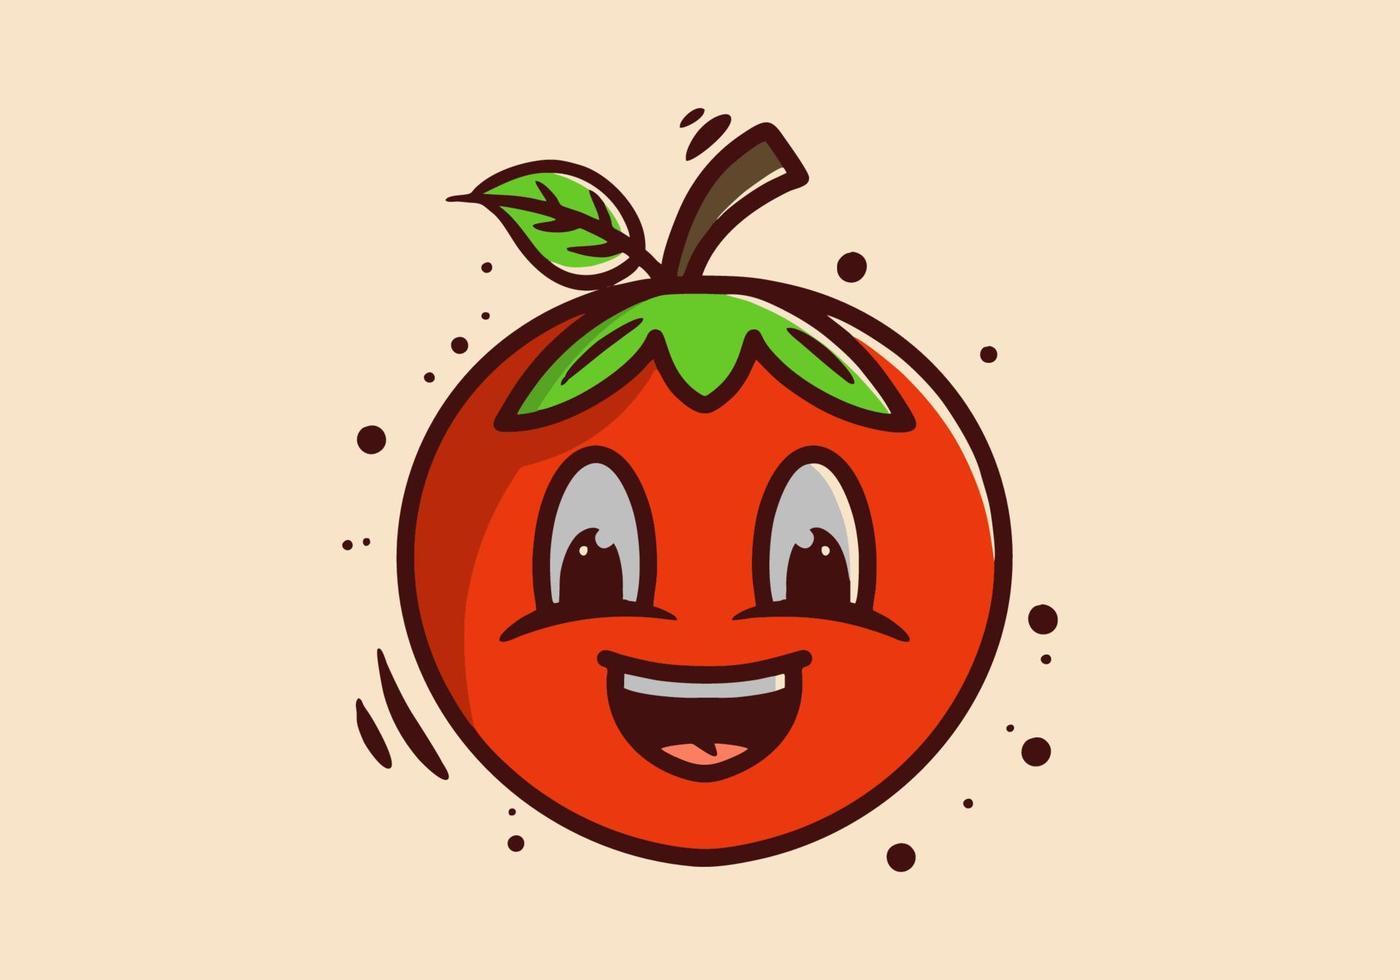 mascot character illustration of a red tomato vector